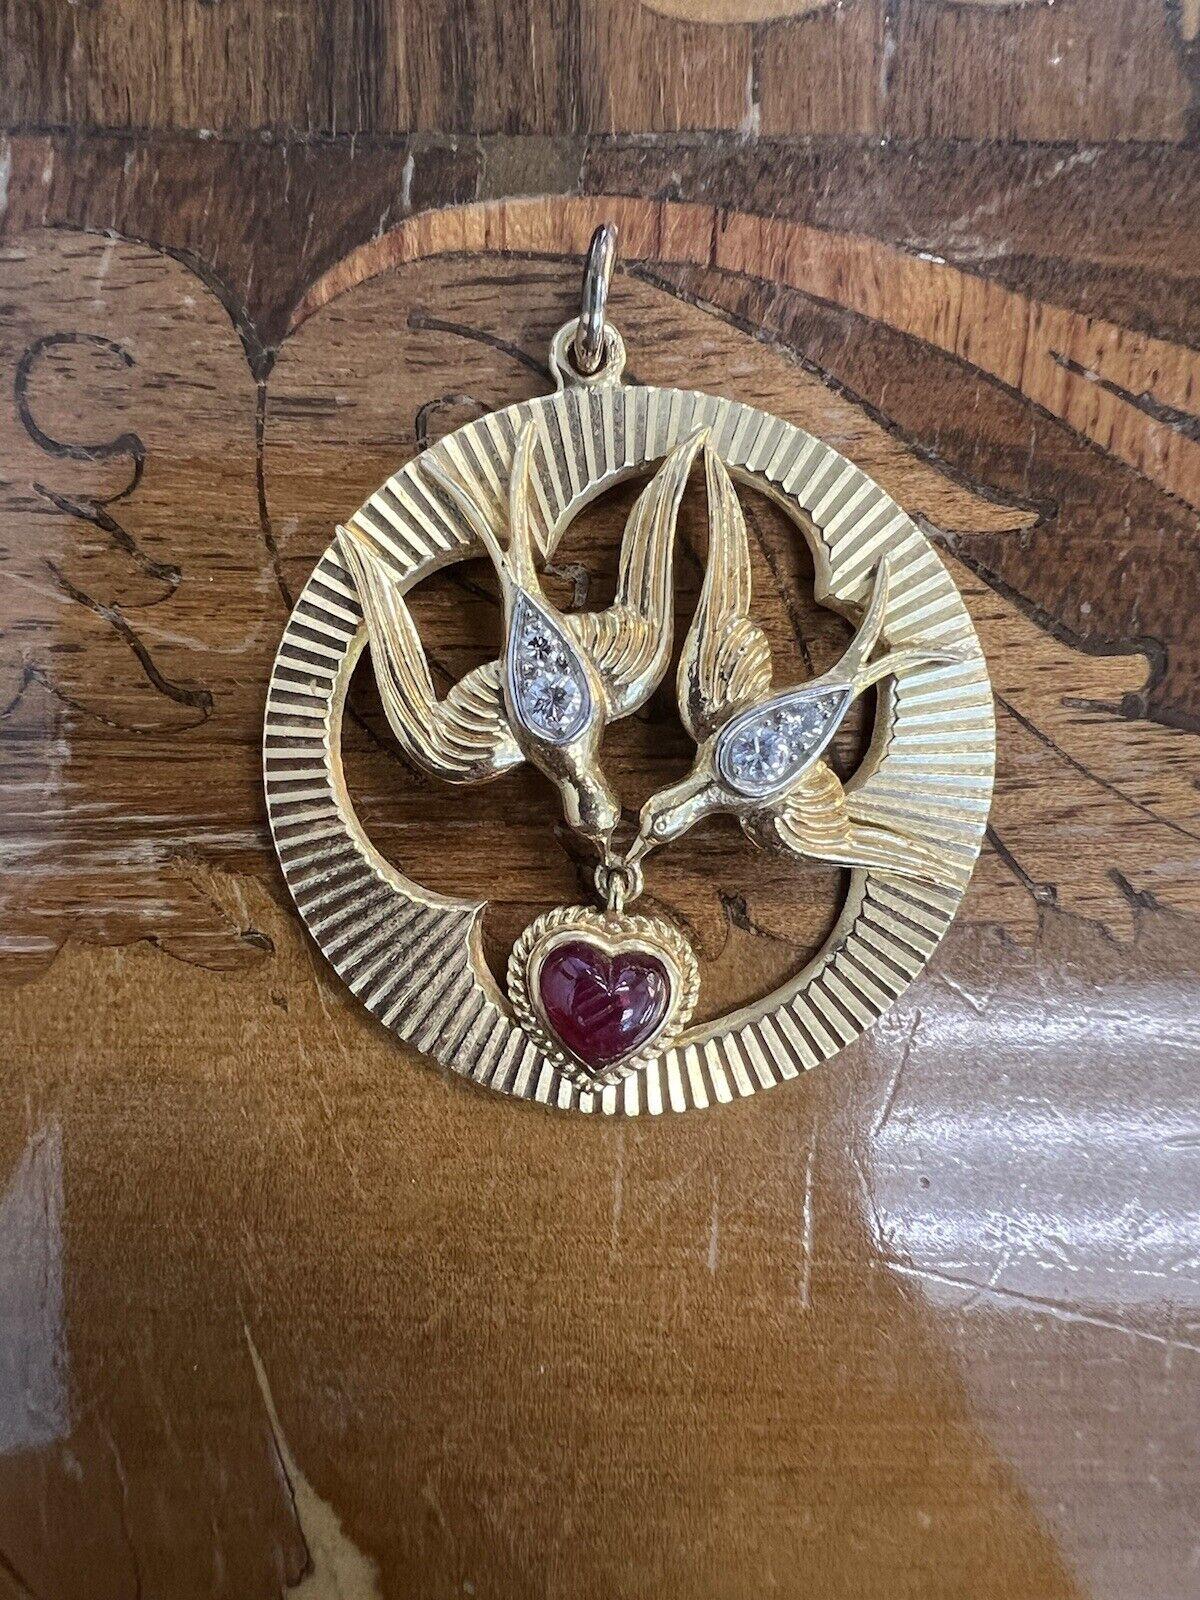 Tiffany & Co. Made in France 18k Yellow Gold, Ruby & Diamond Lovebirds Pendant Circa 1960s


Here is your chance to purchase a beautiful and highly collectible designer pendant.  Truly a great piece at a great price! 

Details:
Size : 1.75